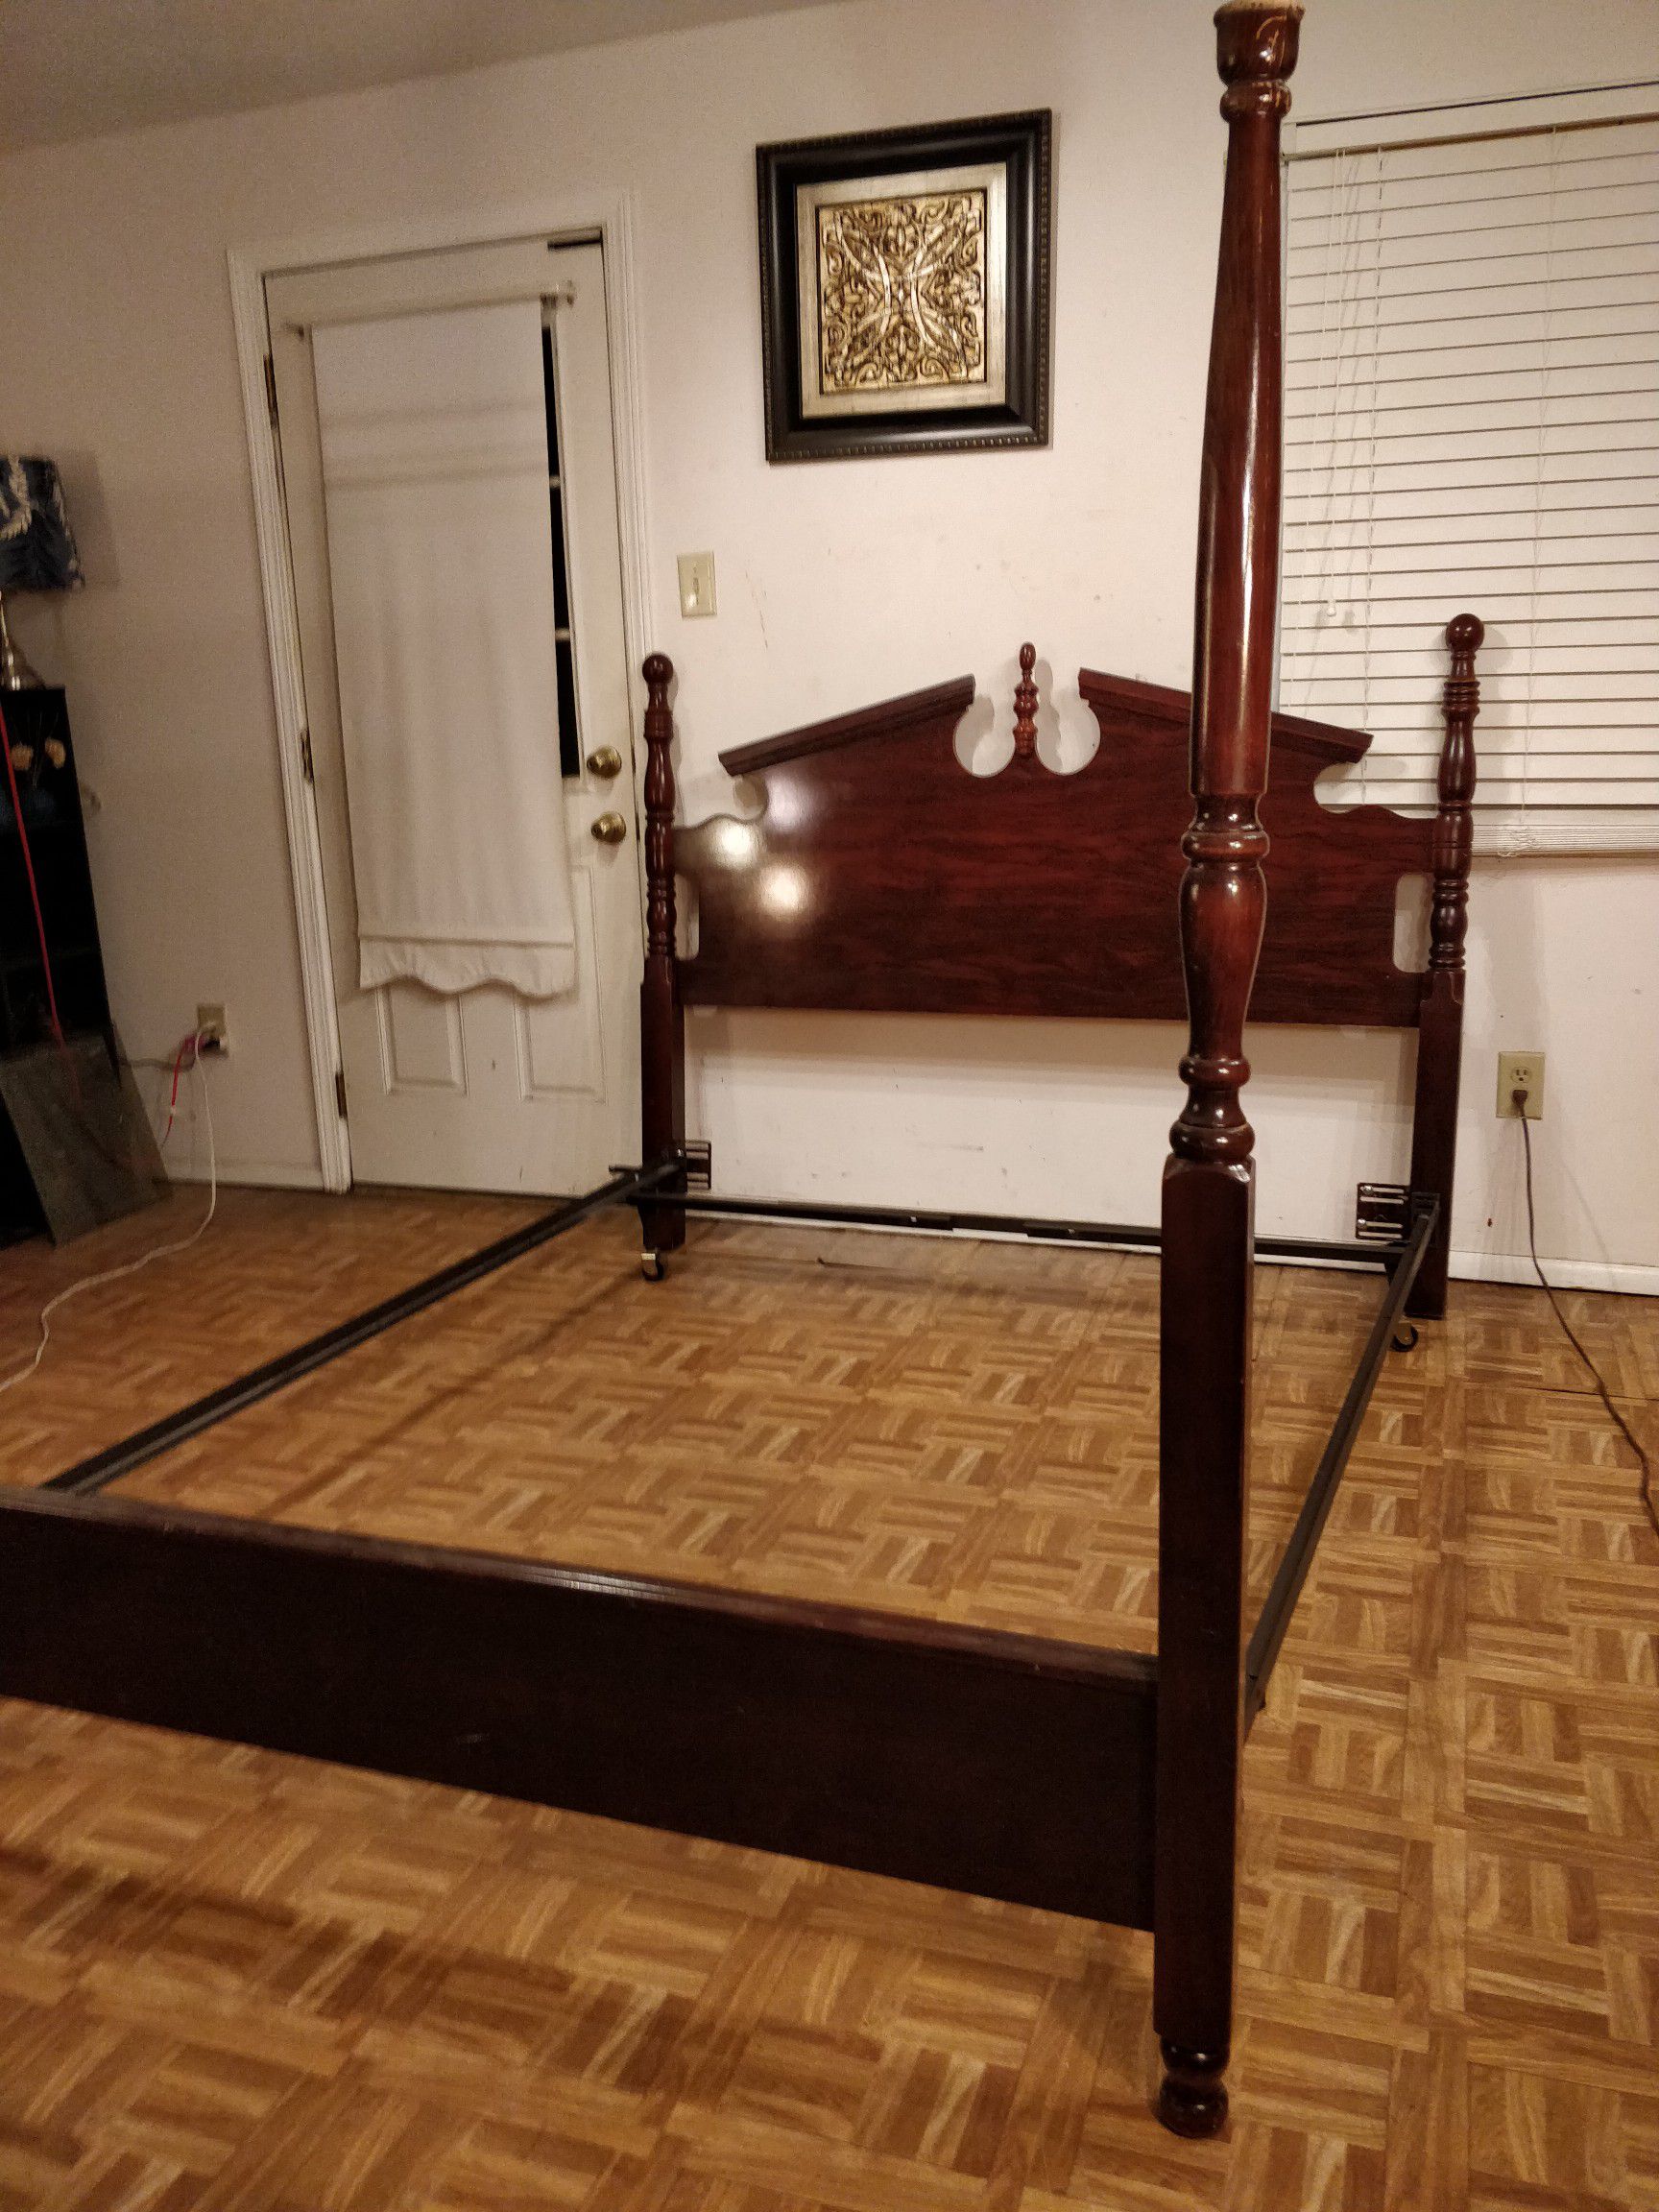 Queen bed frame in very good condition, pet free smoke free